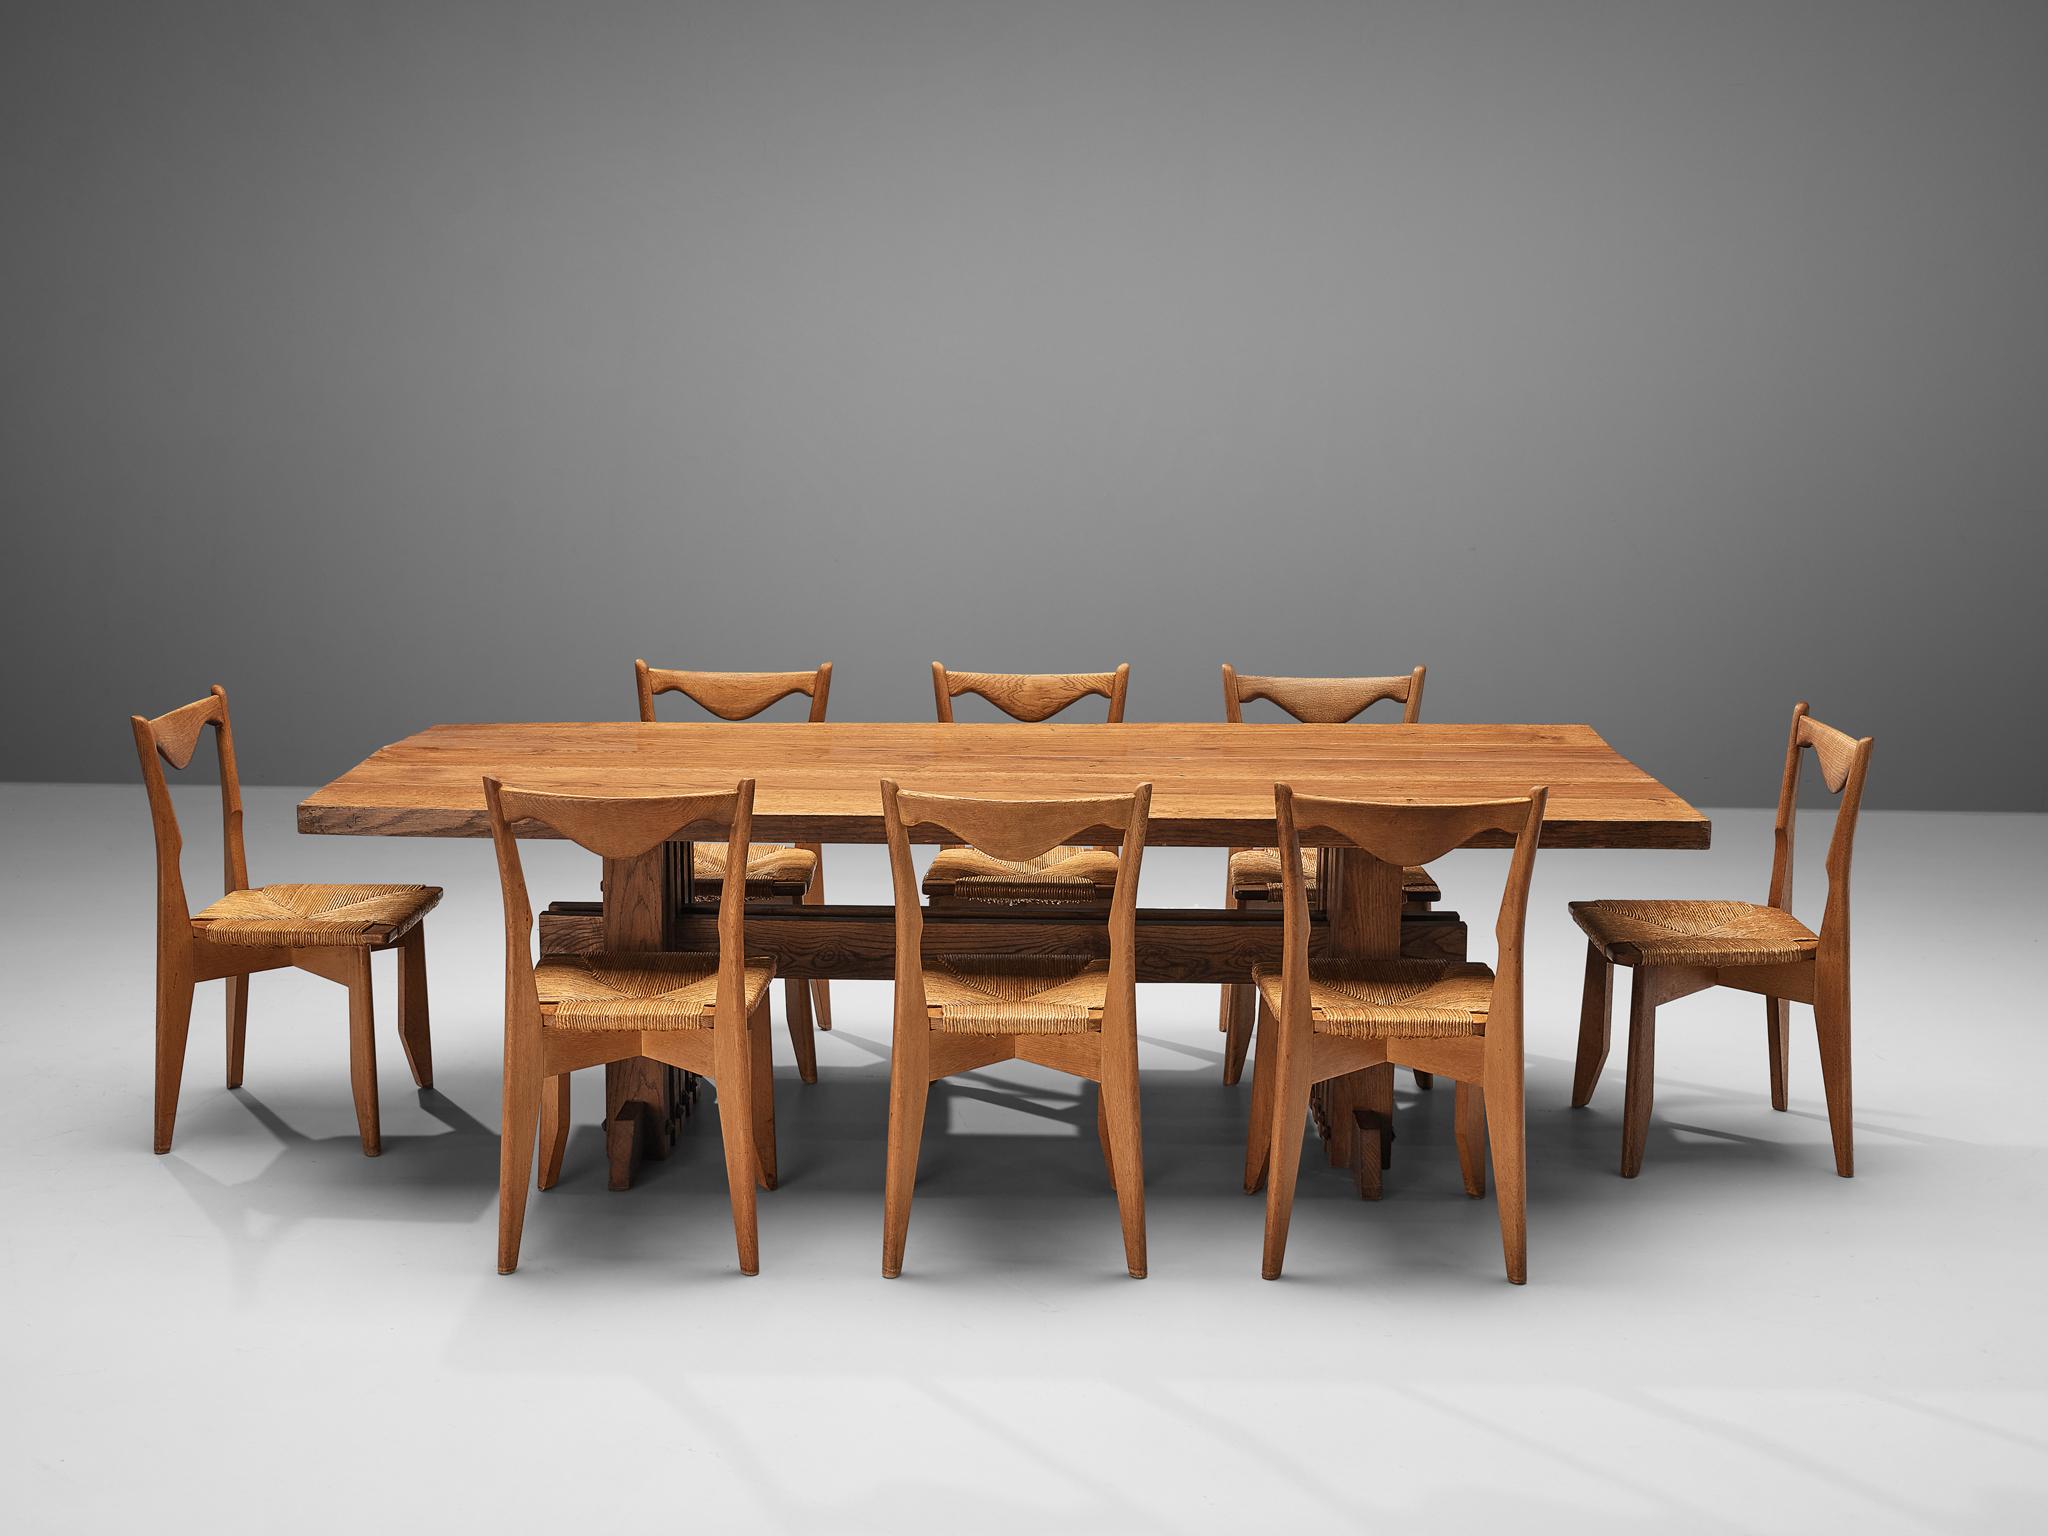 European Jordi Vilanova I Bosch Dining Table with Guillerme & Chambron ‘Thibault’ Chairs